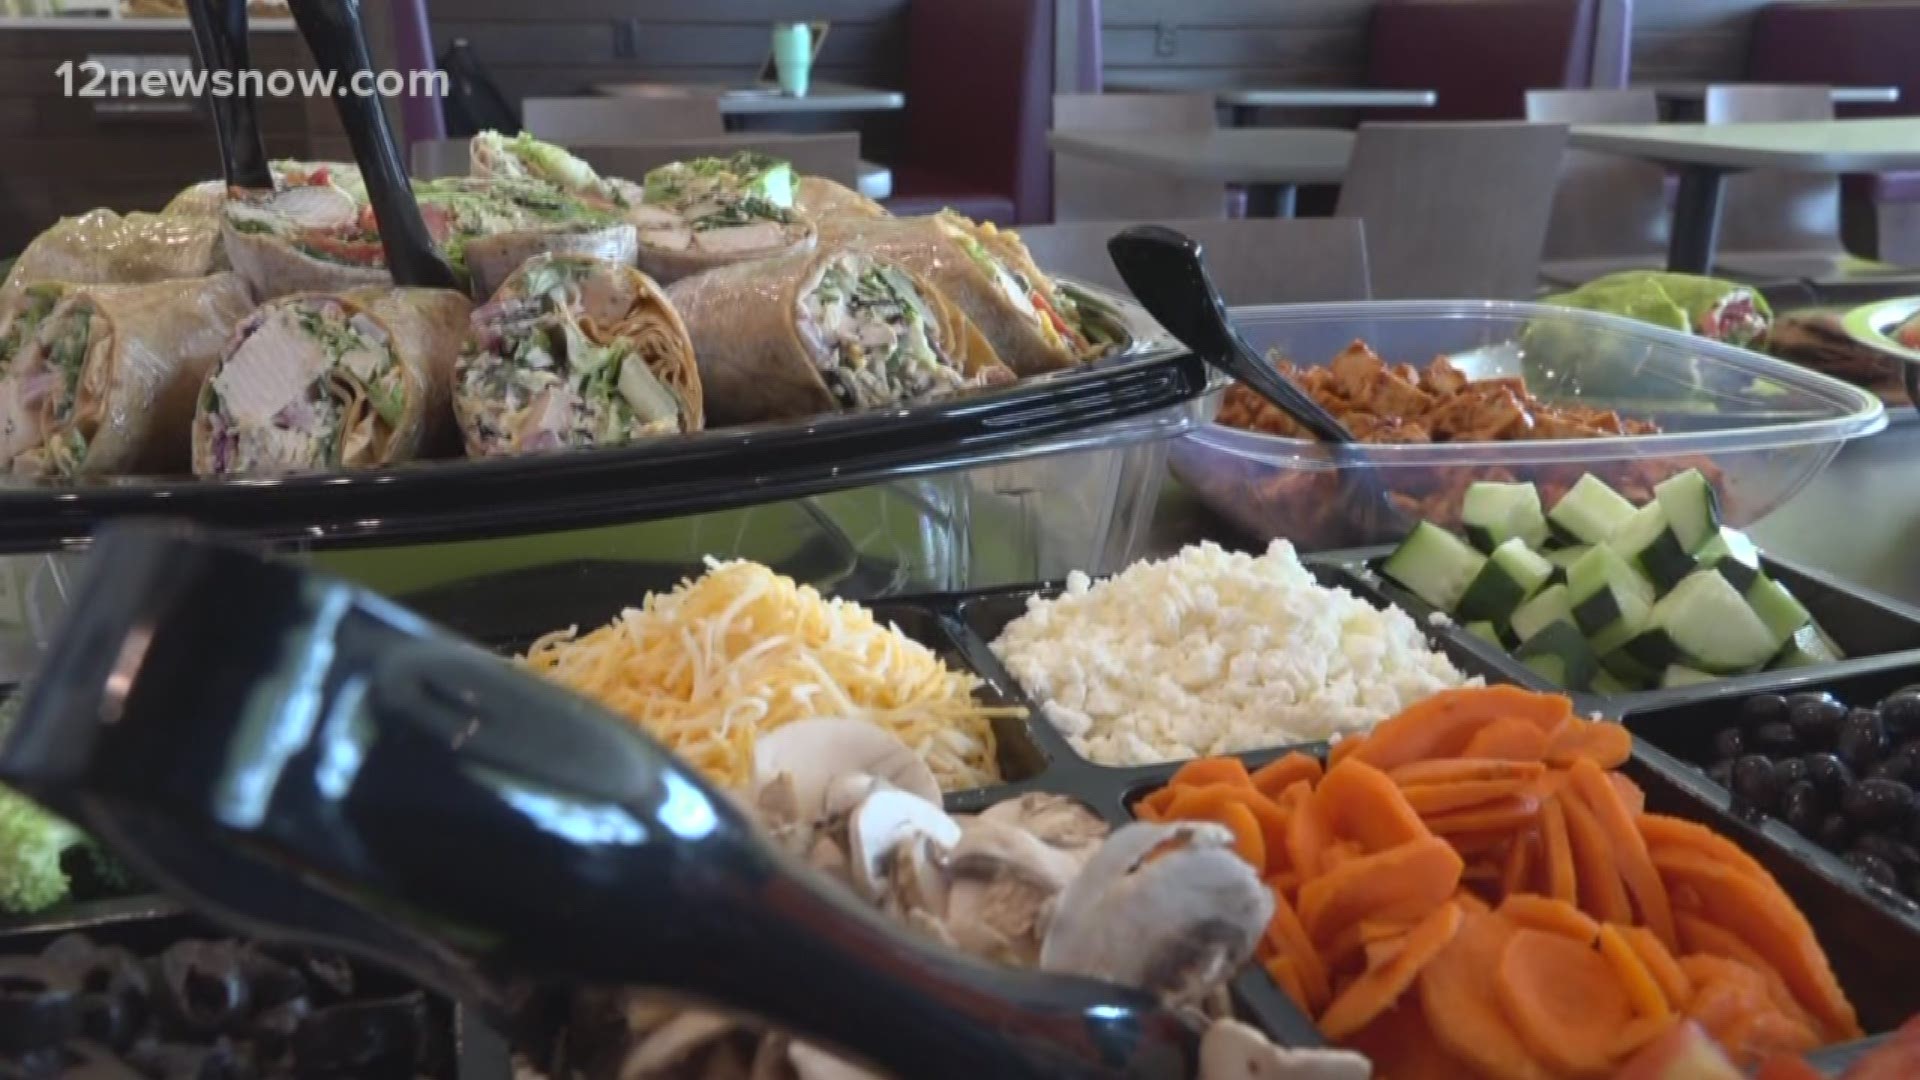 DeJonique sits down with Chad George, the owner of a salad bar in restaurant called Salata.